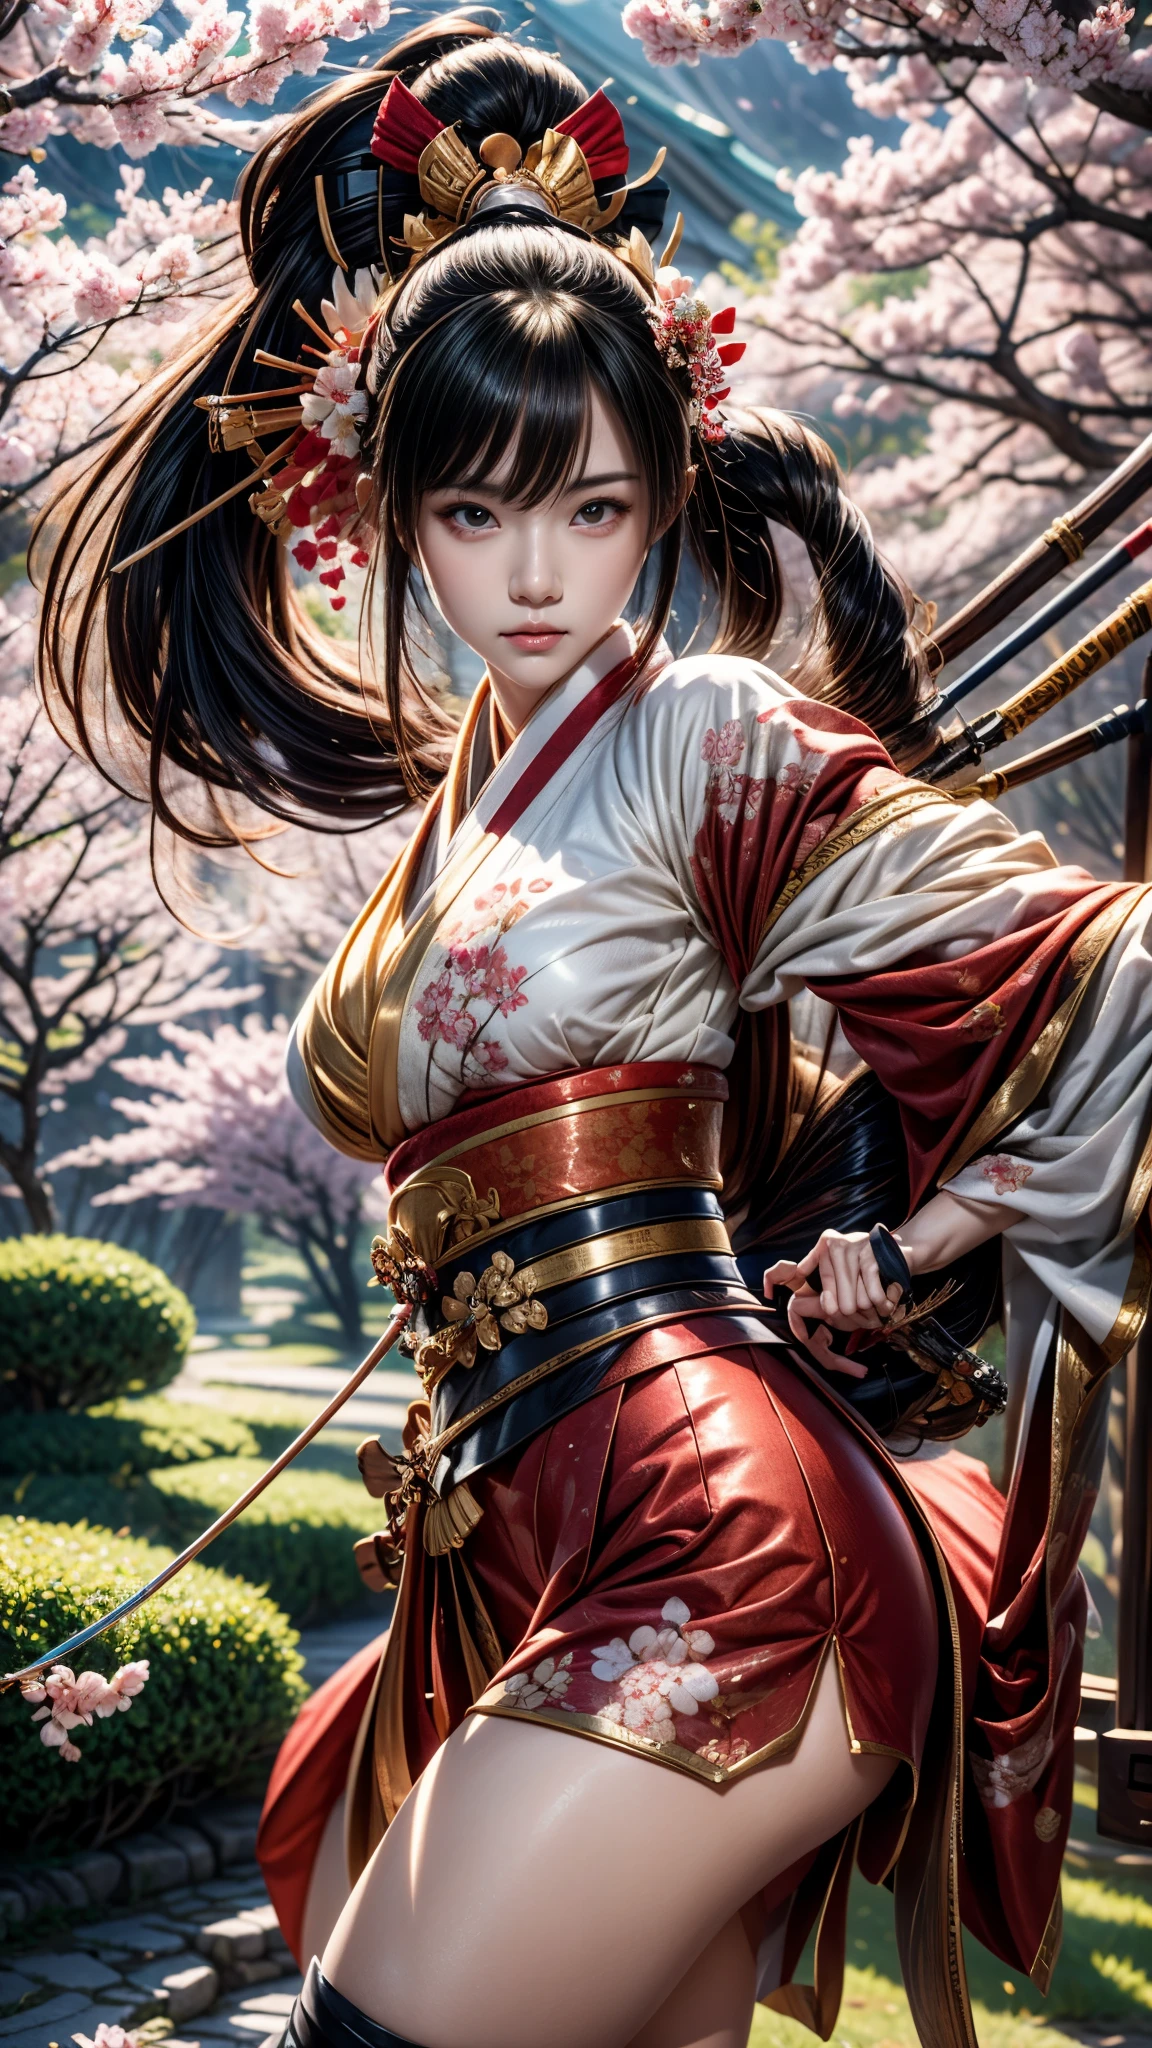 a woman in the sakura forest , onmyoji detailed art, extremely detailed artgerm, onmyoji, onmyoji portrait, artgerm detailed, anime girl with a bow and arrow, artwork in the style of guweiz, fox nobushi holding a naginata, artgerm. high detail